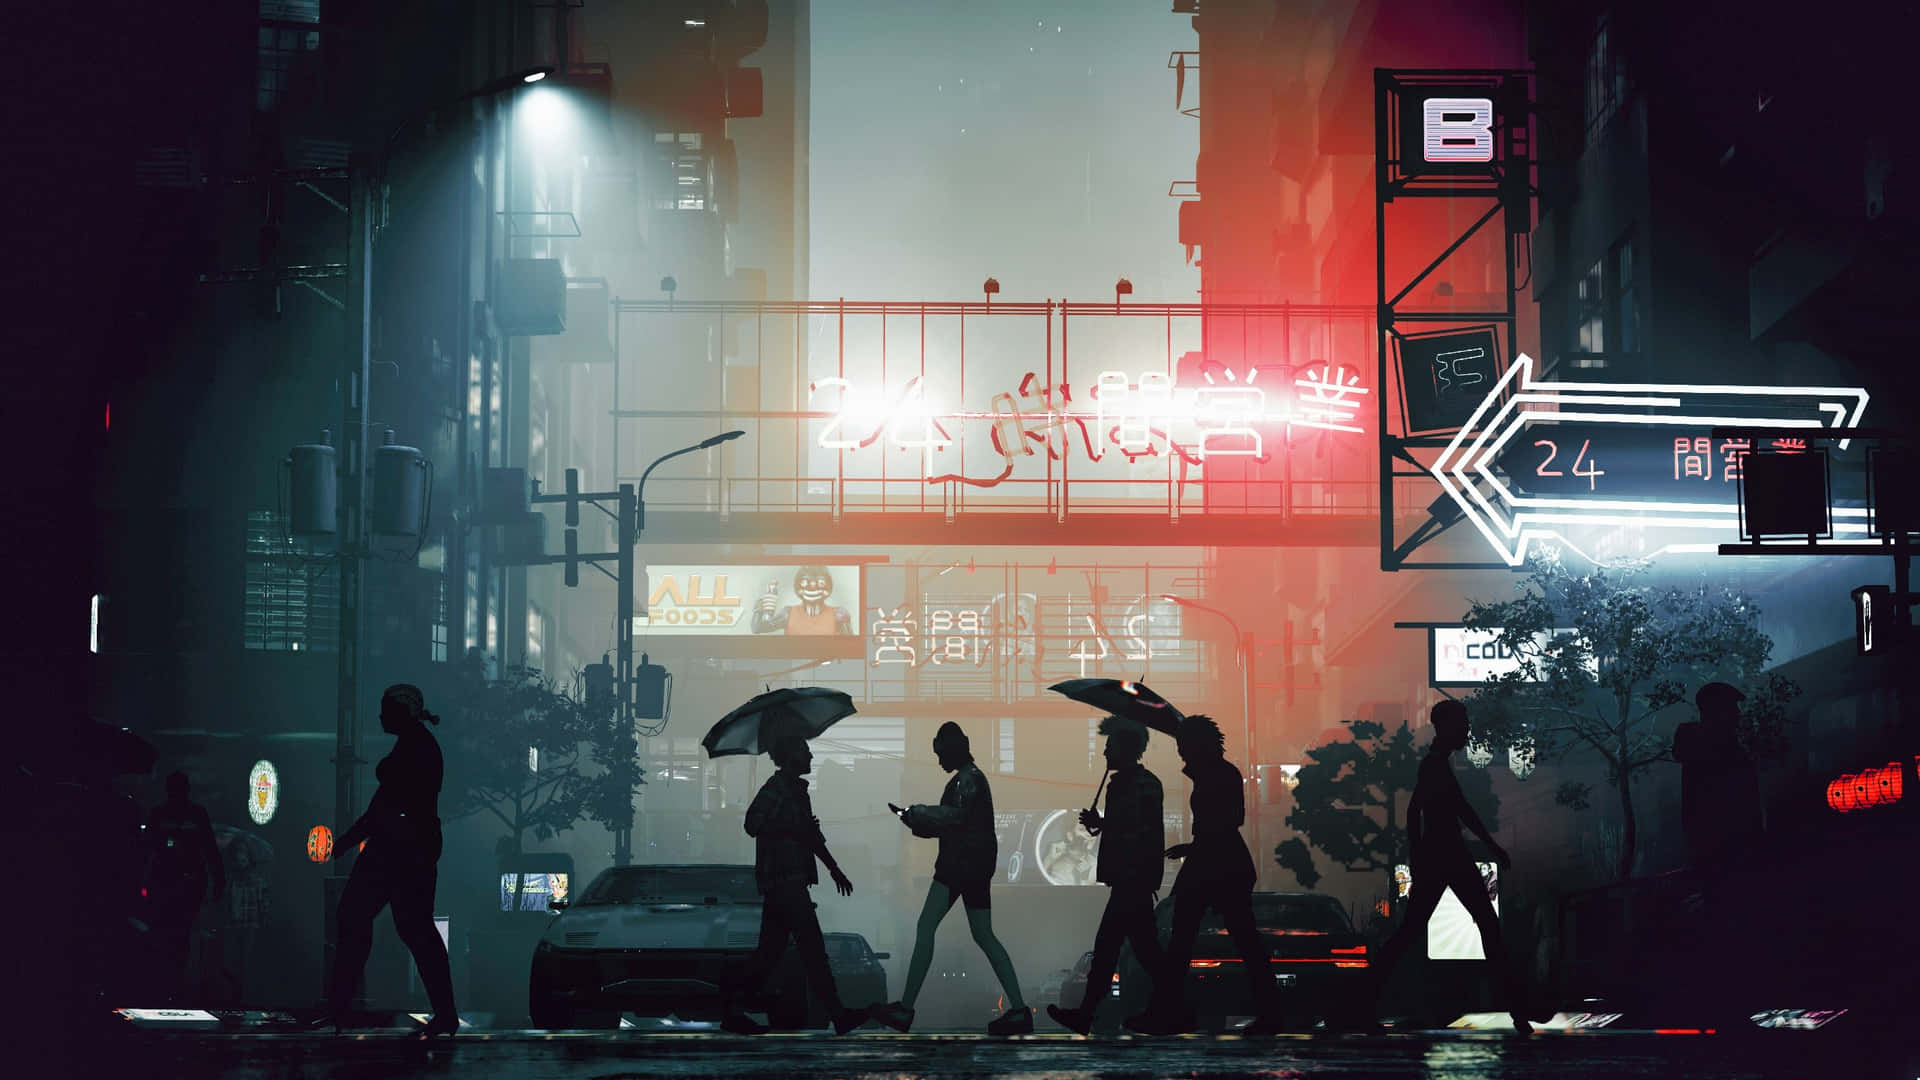 Travel through space and the world of Cyberpunk